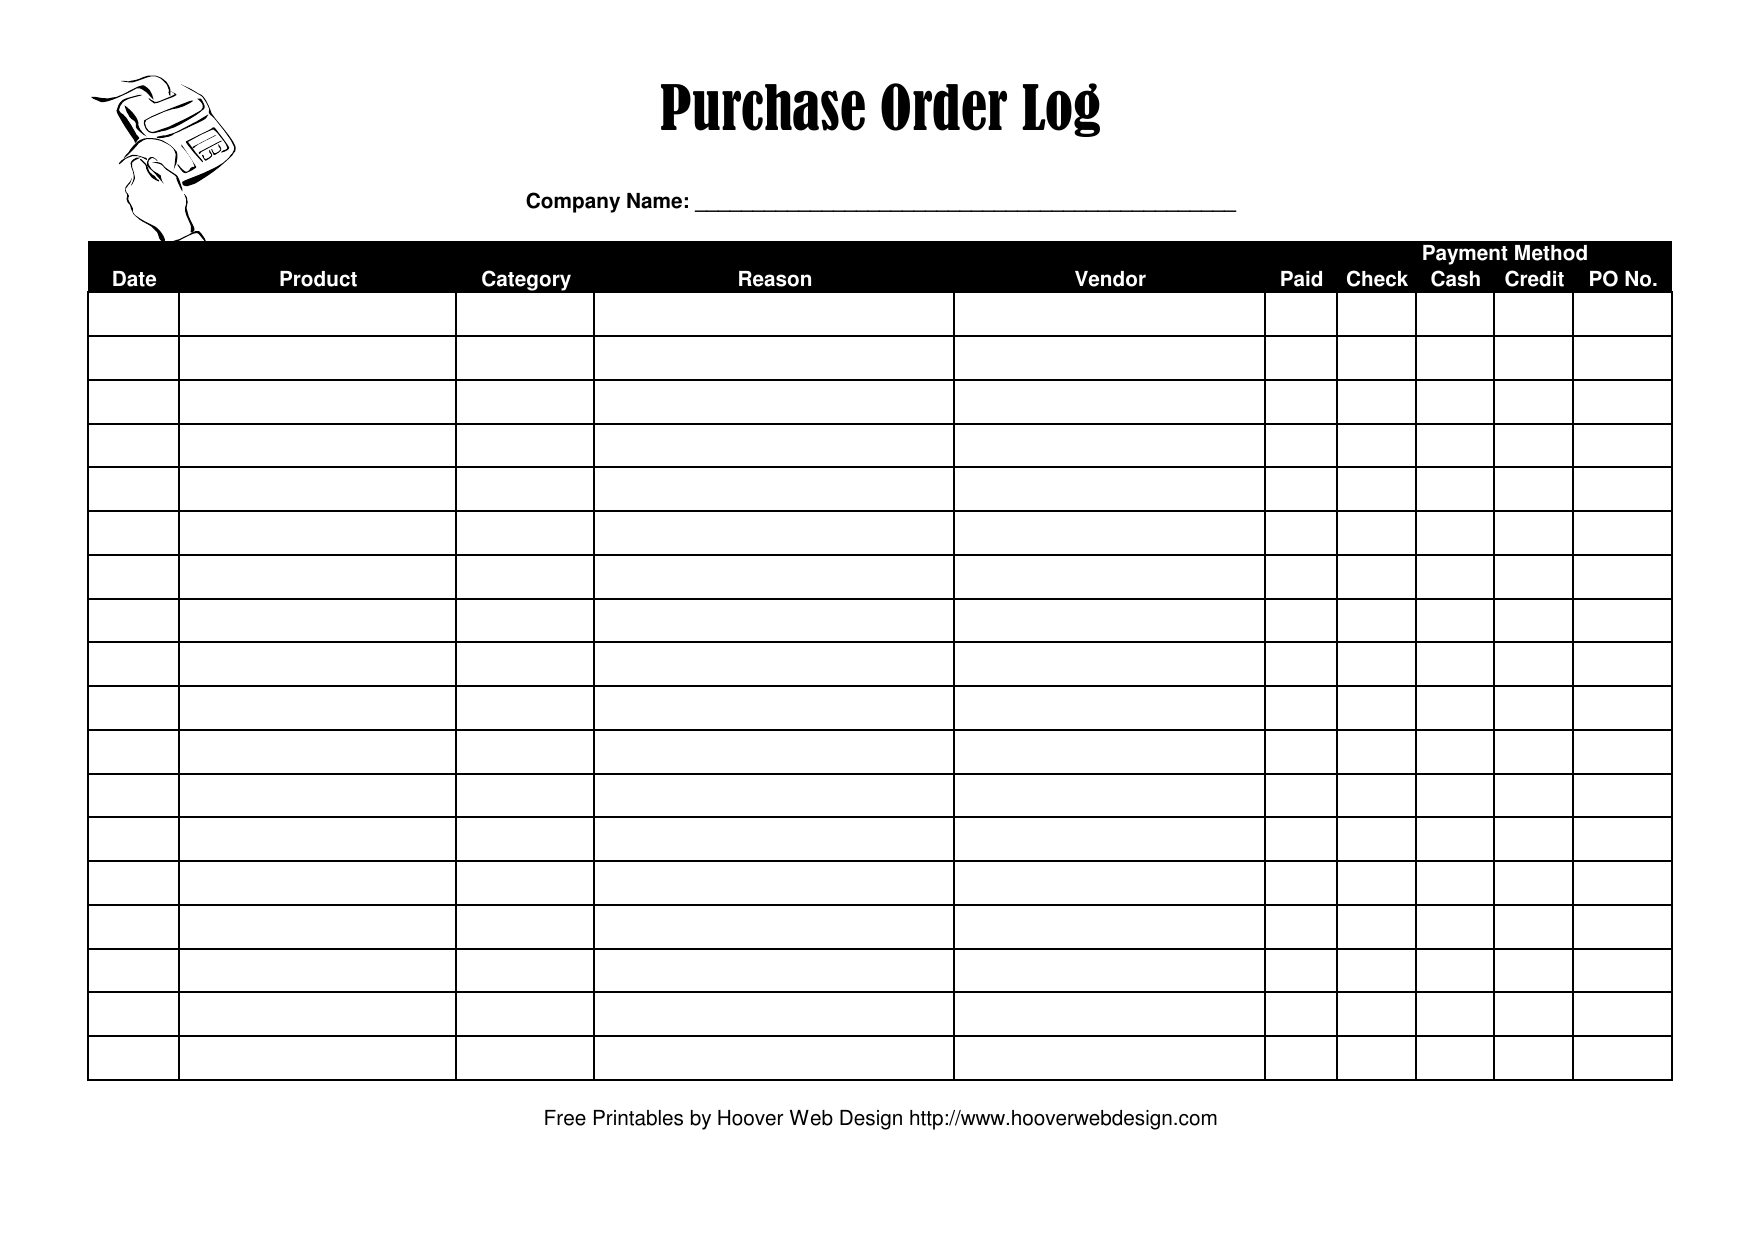 download-purchase-order-log-template-excel-pdf-rtf-word